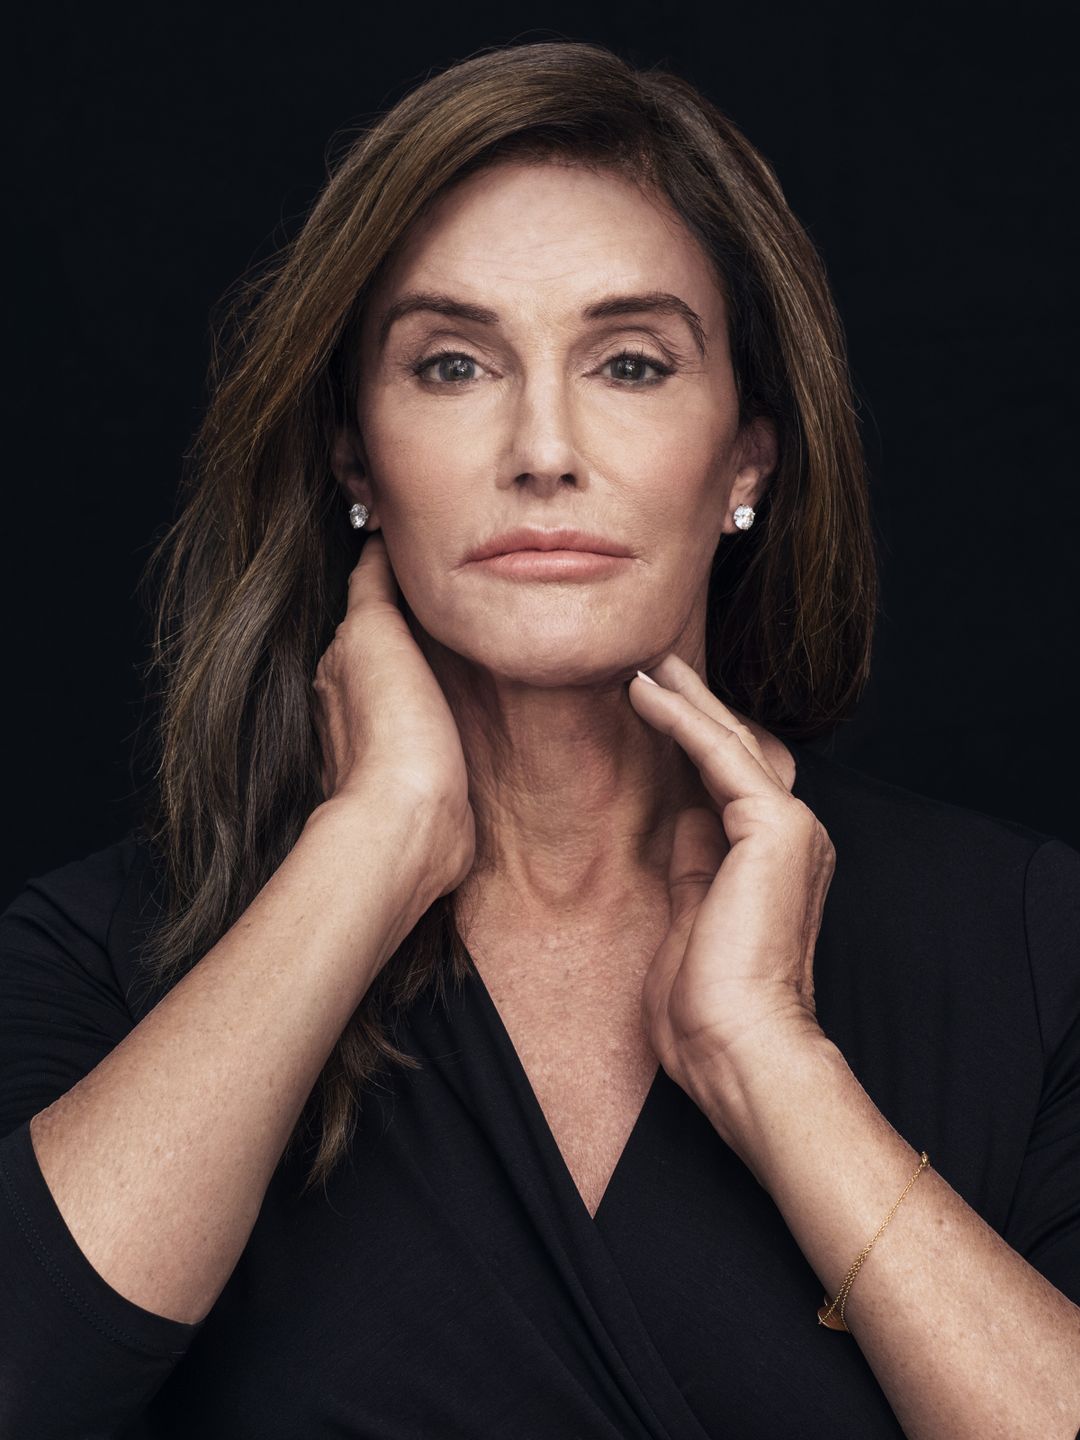 Caitlyn Jenner where did she study